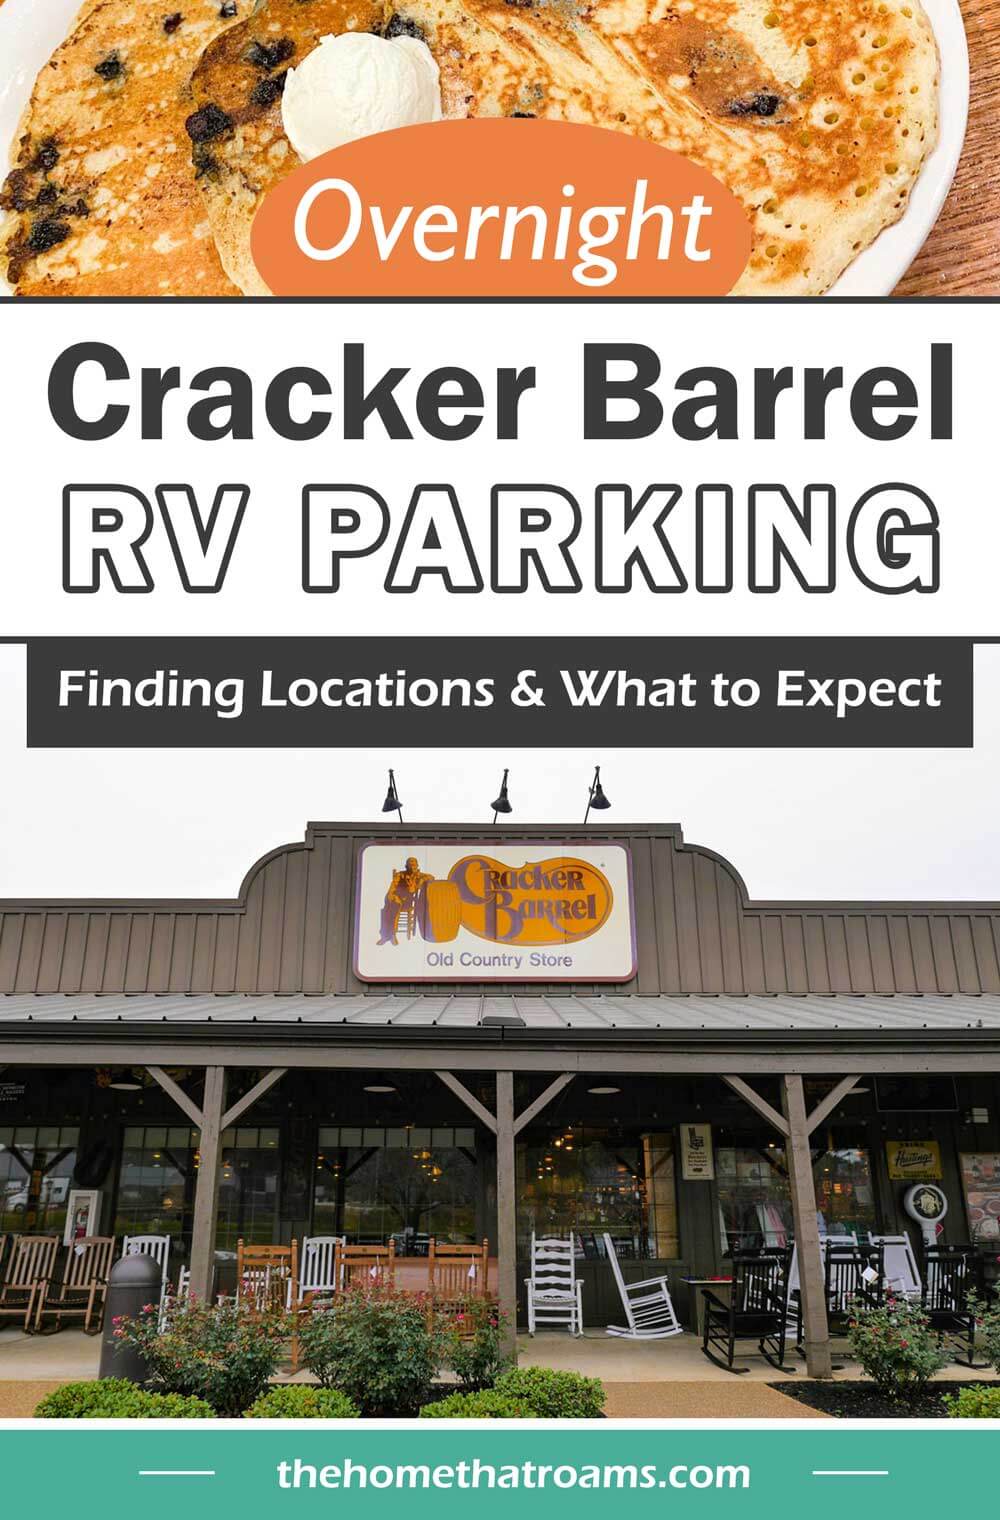 pin of overnight parking at Cracker Barrel - pancakes and image of the front of Cracker Barrel restaurant